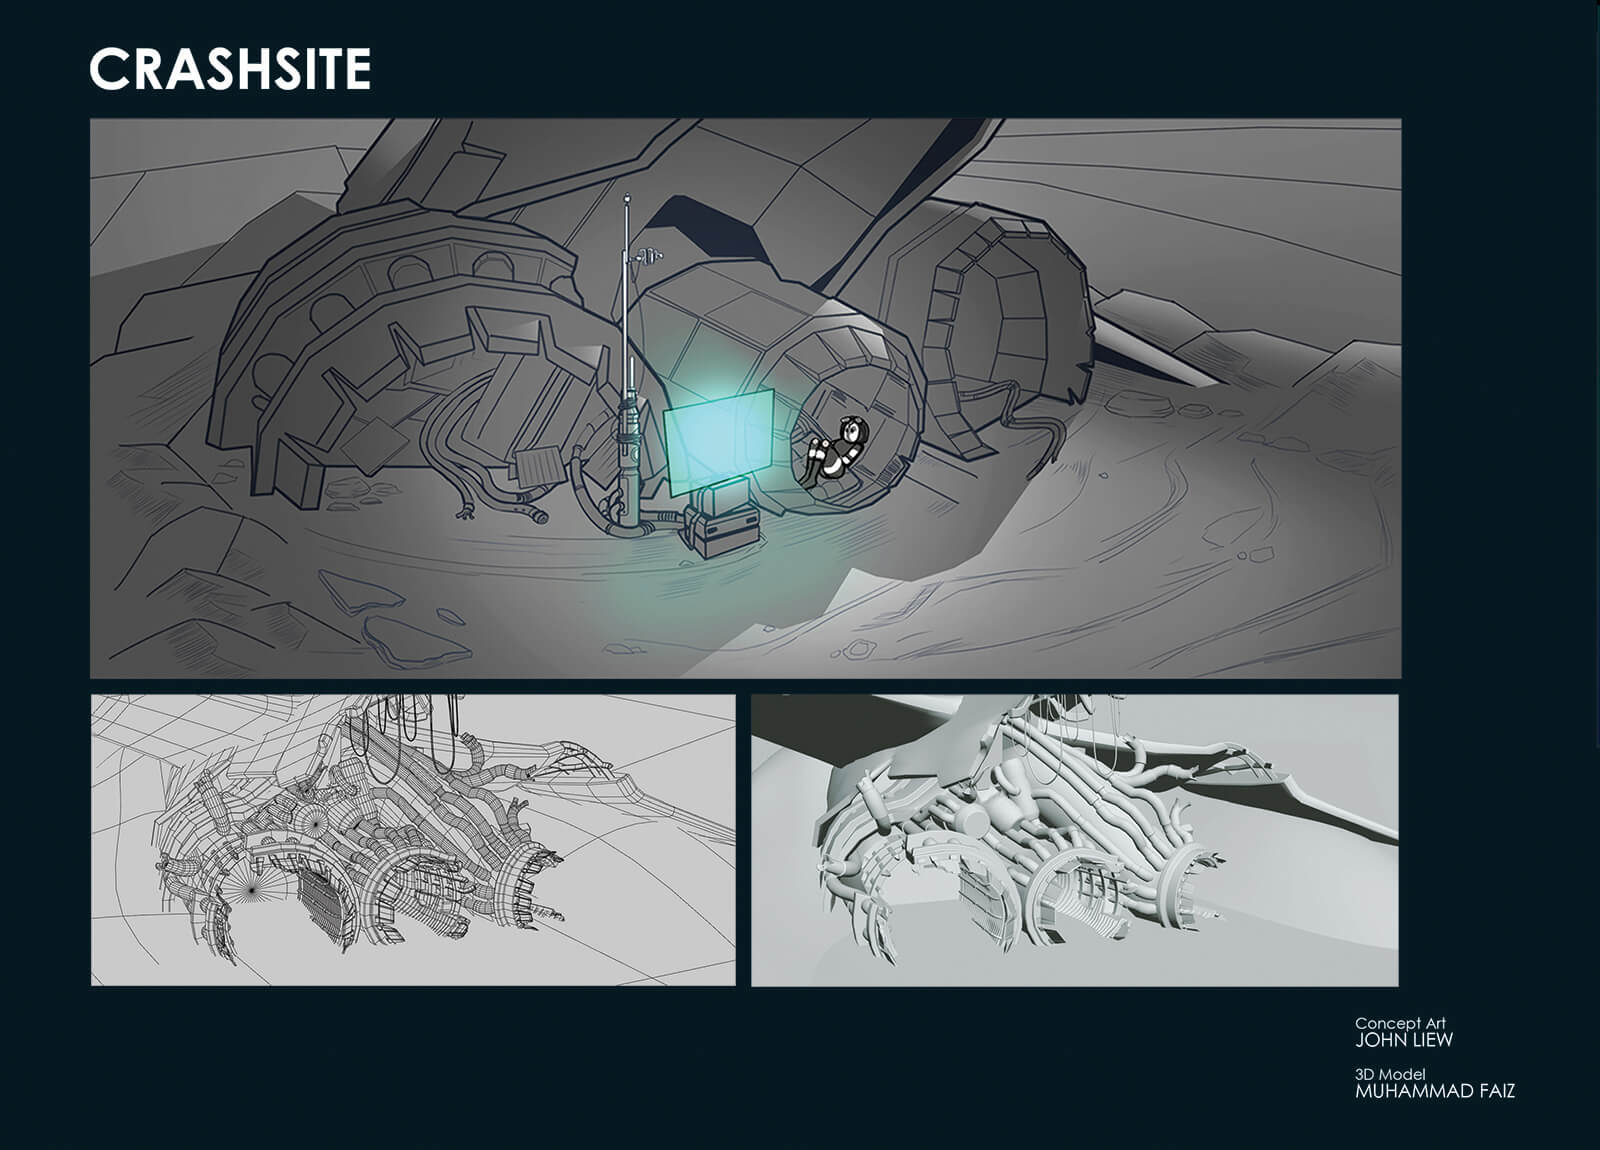 Concept drawing by John Liew and 3D model by Muhammad Faiz showing the spaceship crash site from The Way Home film.